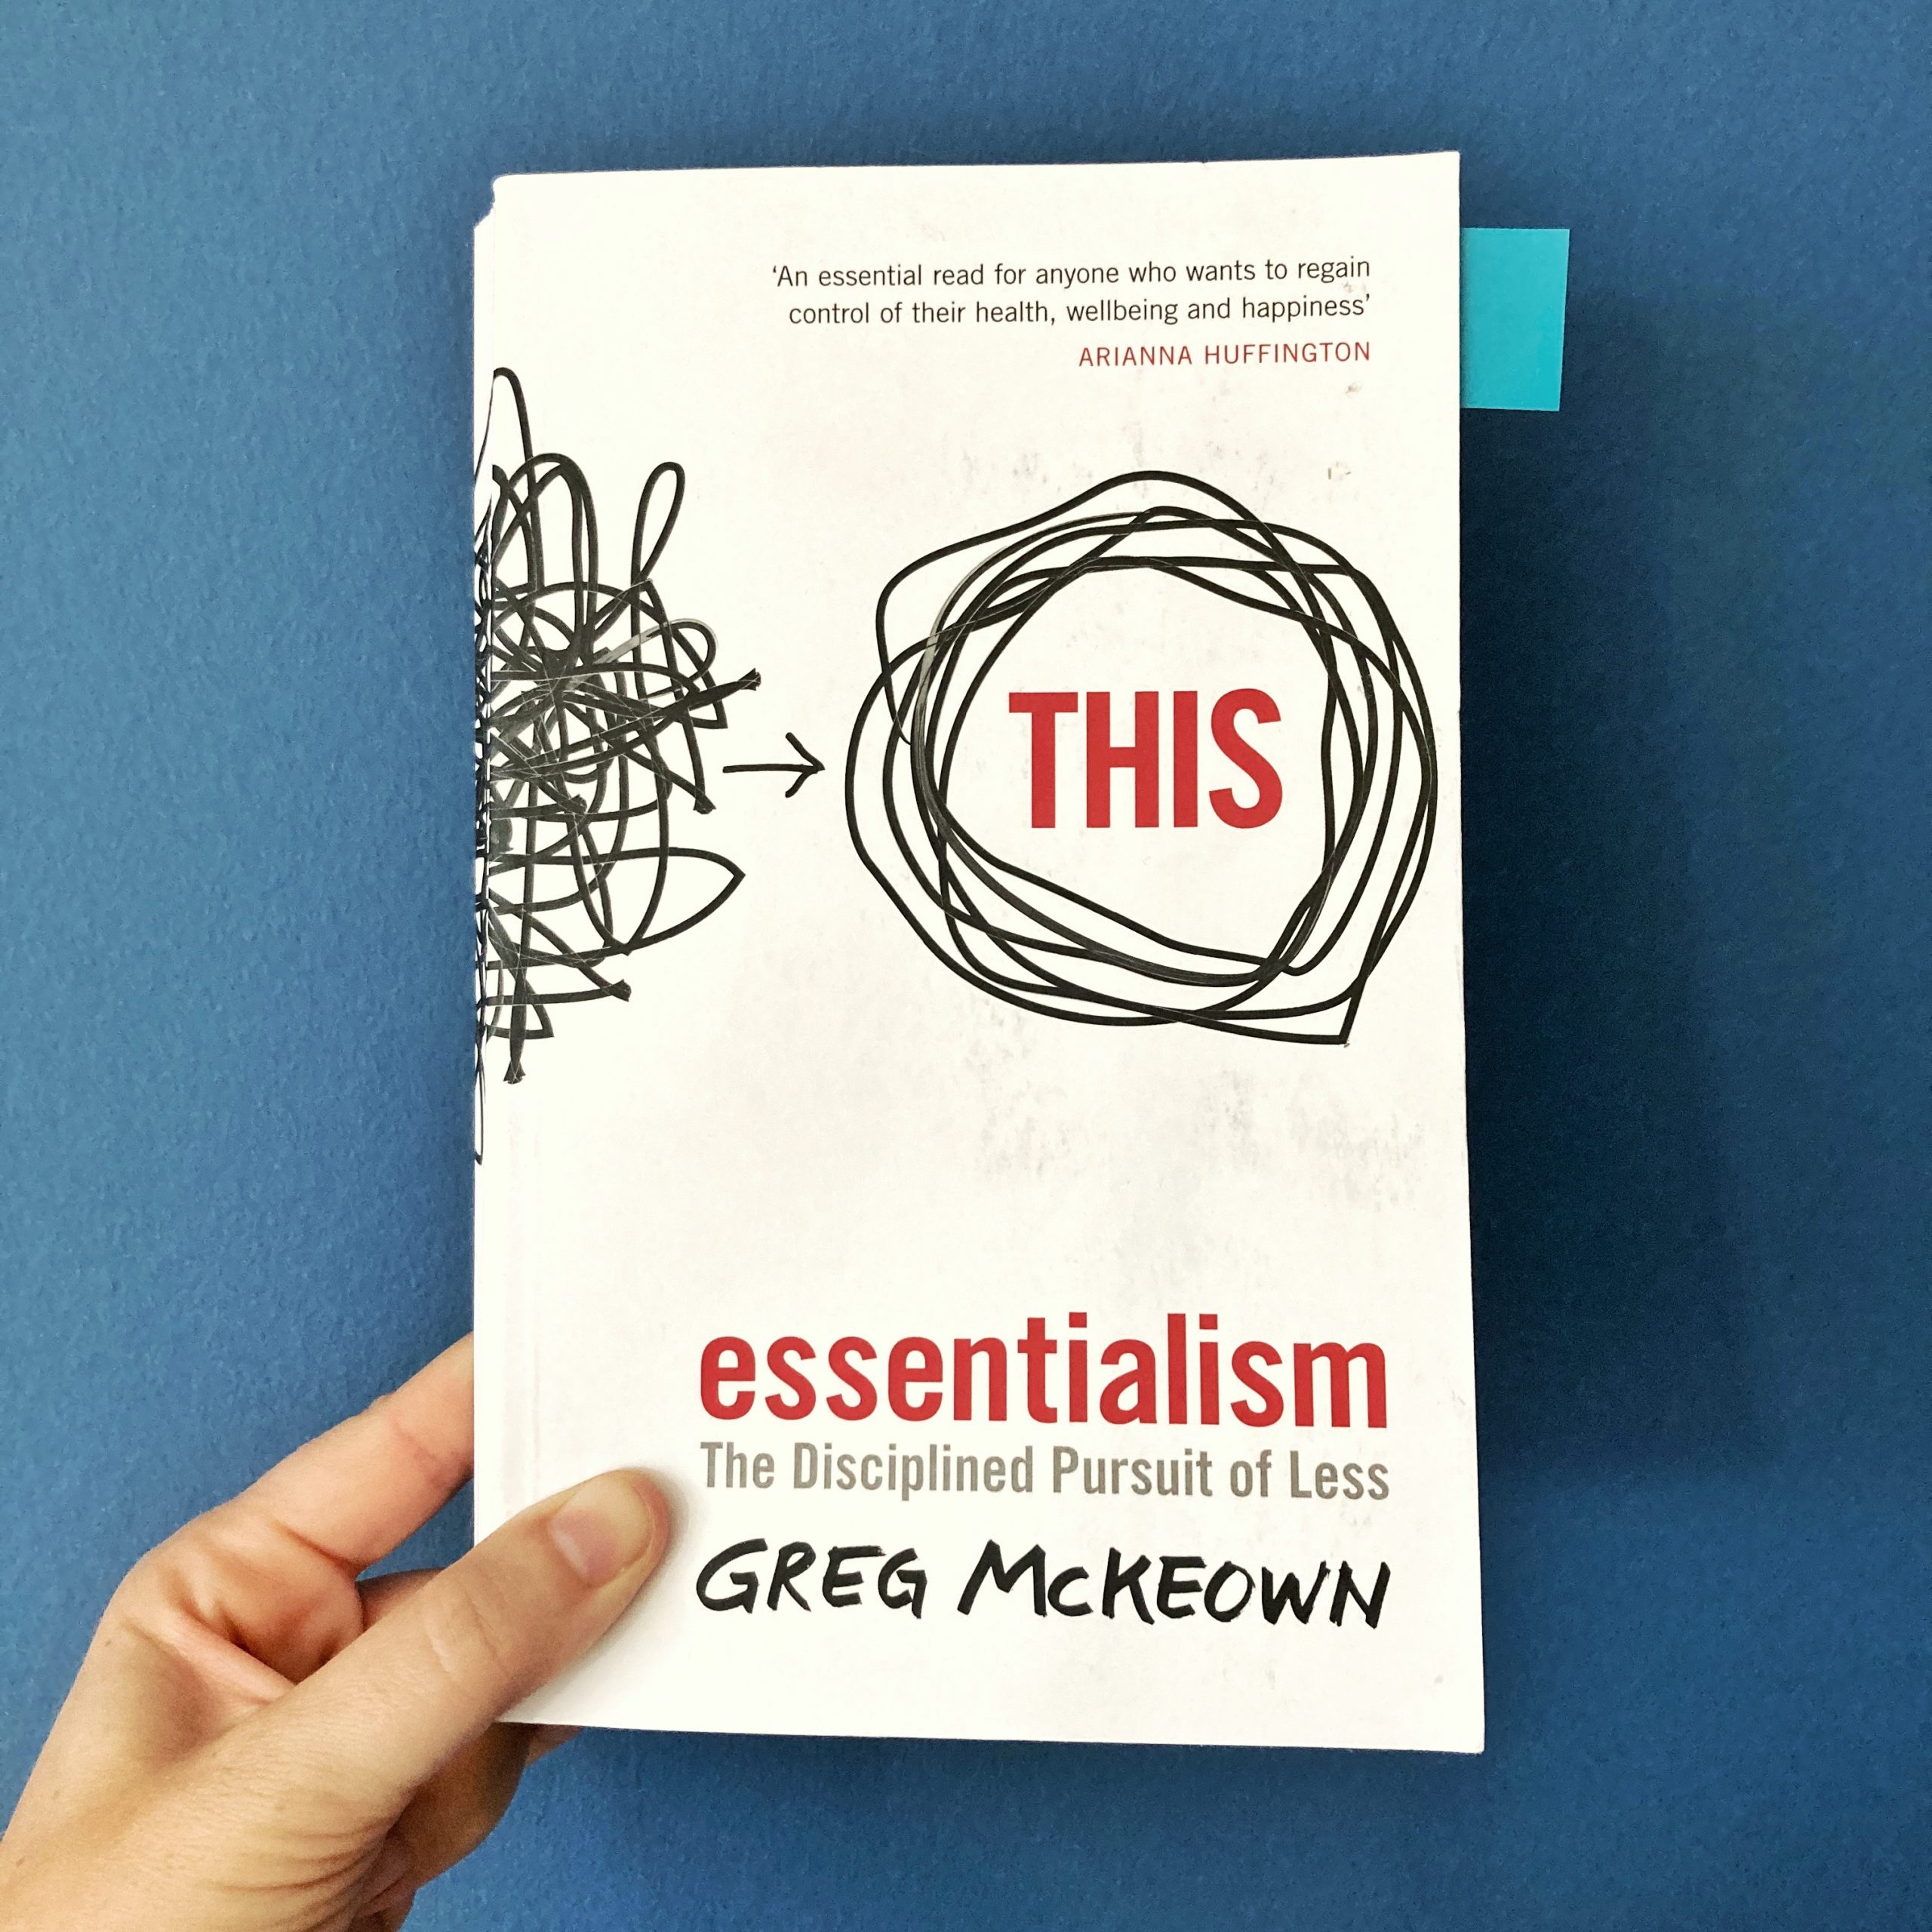 civilization very much Plenary session book reviews | essentialism by greg mckeown on idealistatheart.com